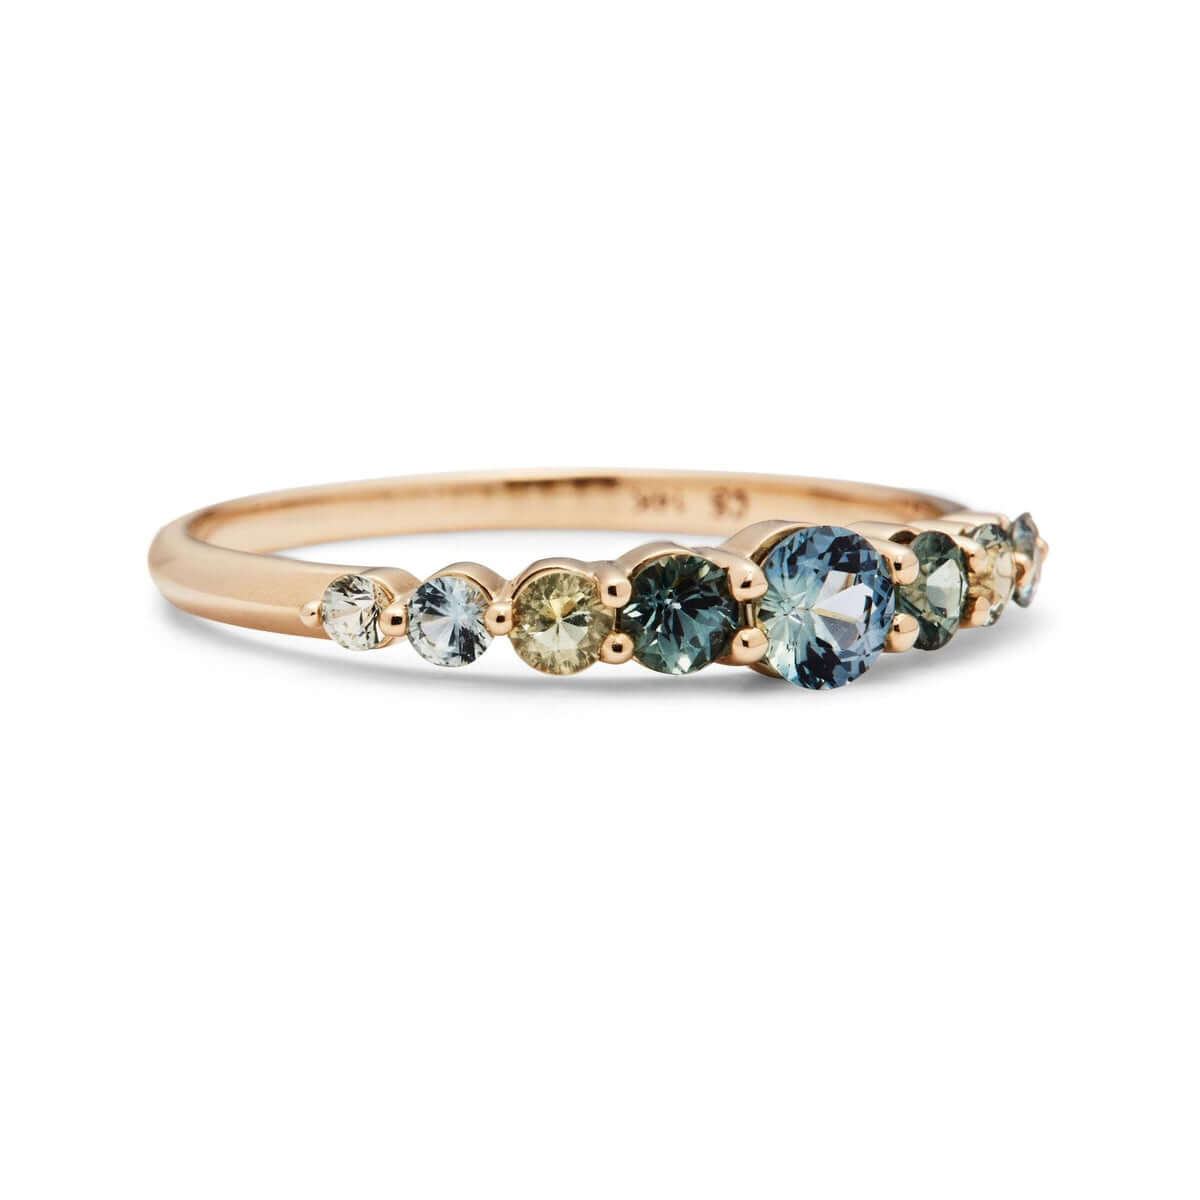 Edie Australian Sapphire Ring on a plain background, featuring responsibly sourced sapphires in hues of blues and greens.